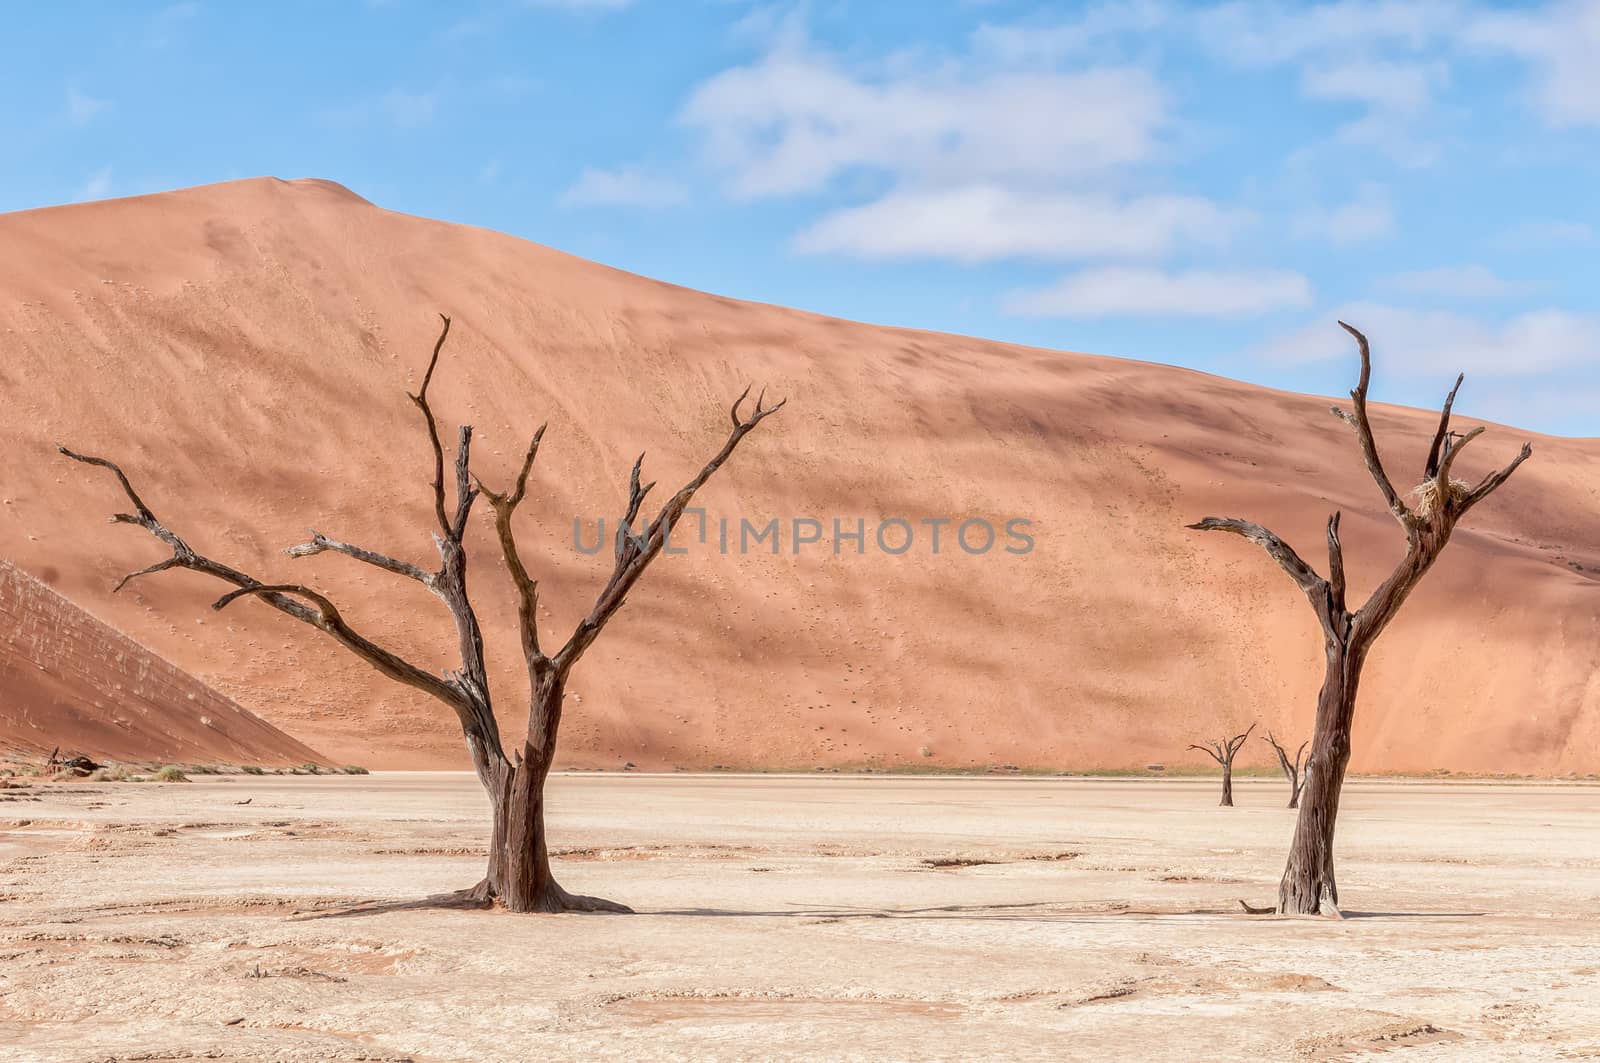 Dead tree stumps, with a sand dune backdrop, at Deadvlei